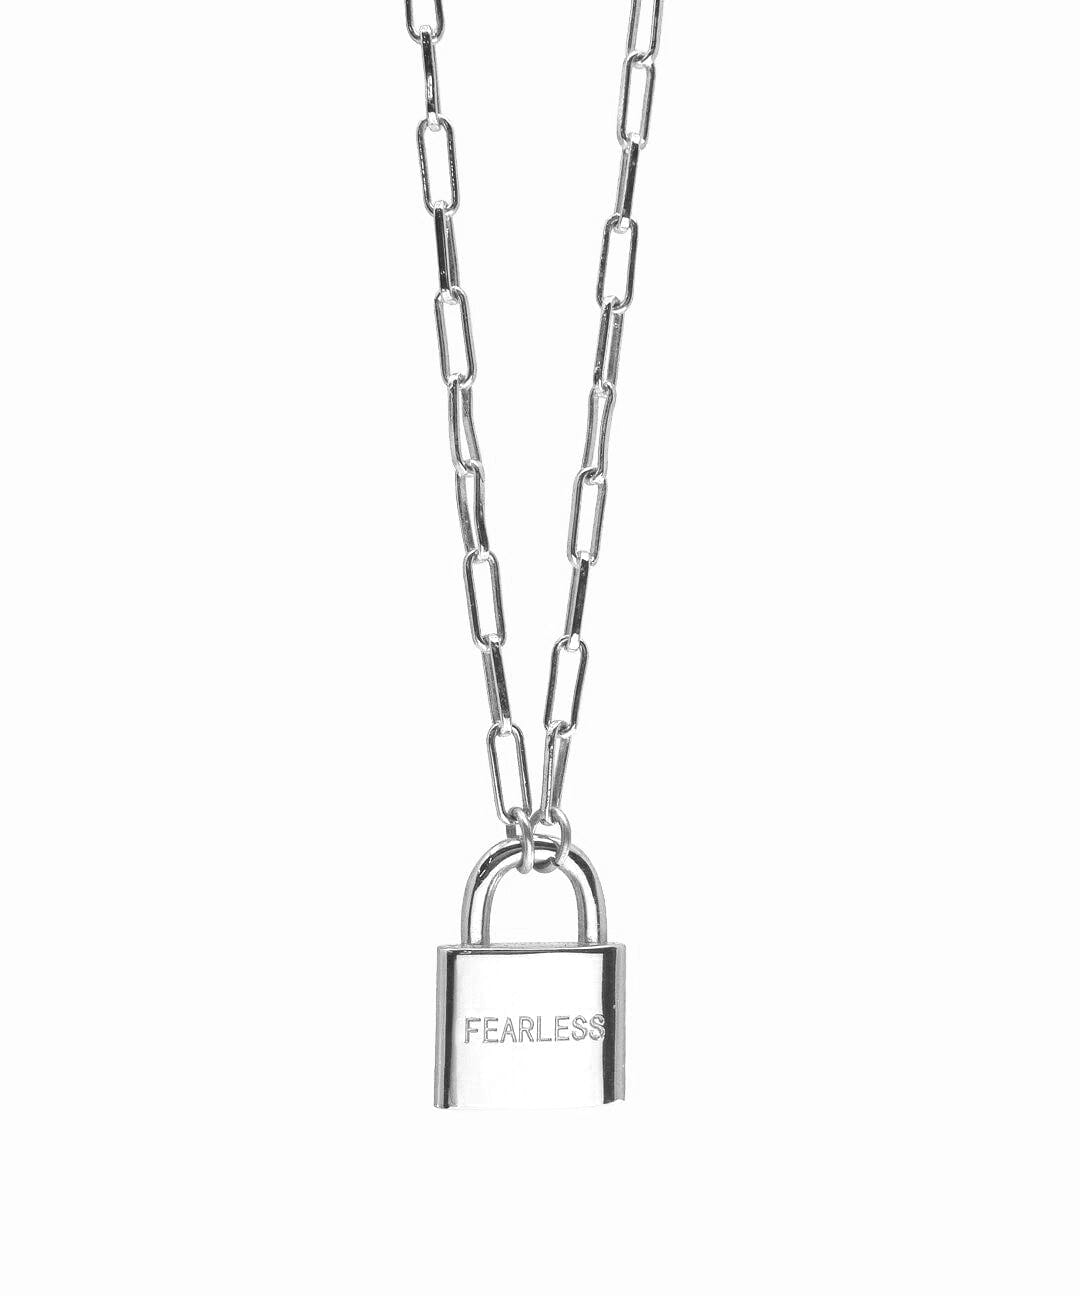 Brooklyn Padlock Necklace Necklaces The Giving Keys FEARLESS SILVER 